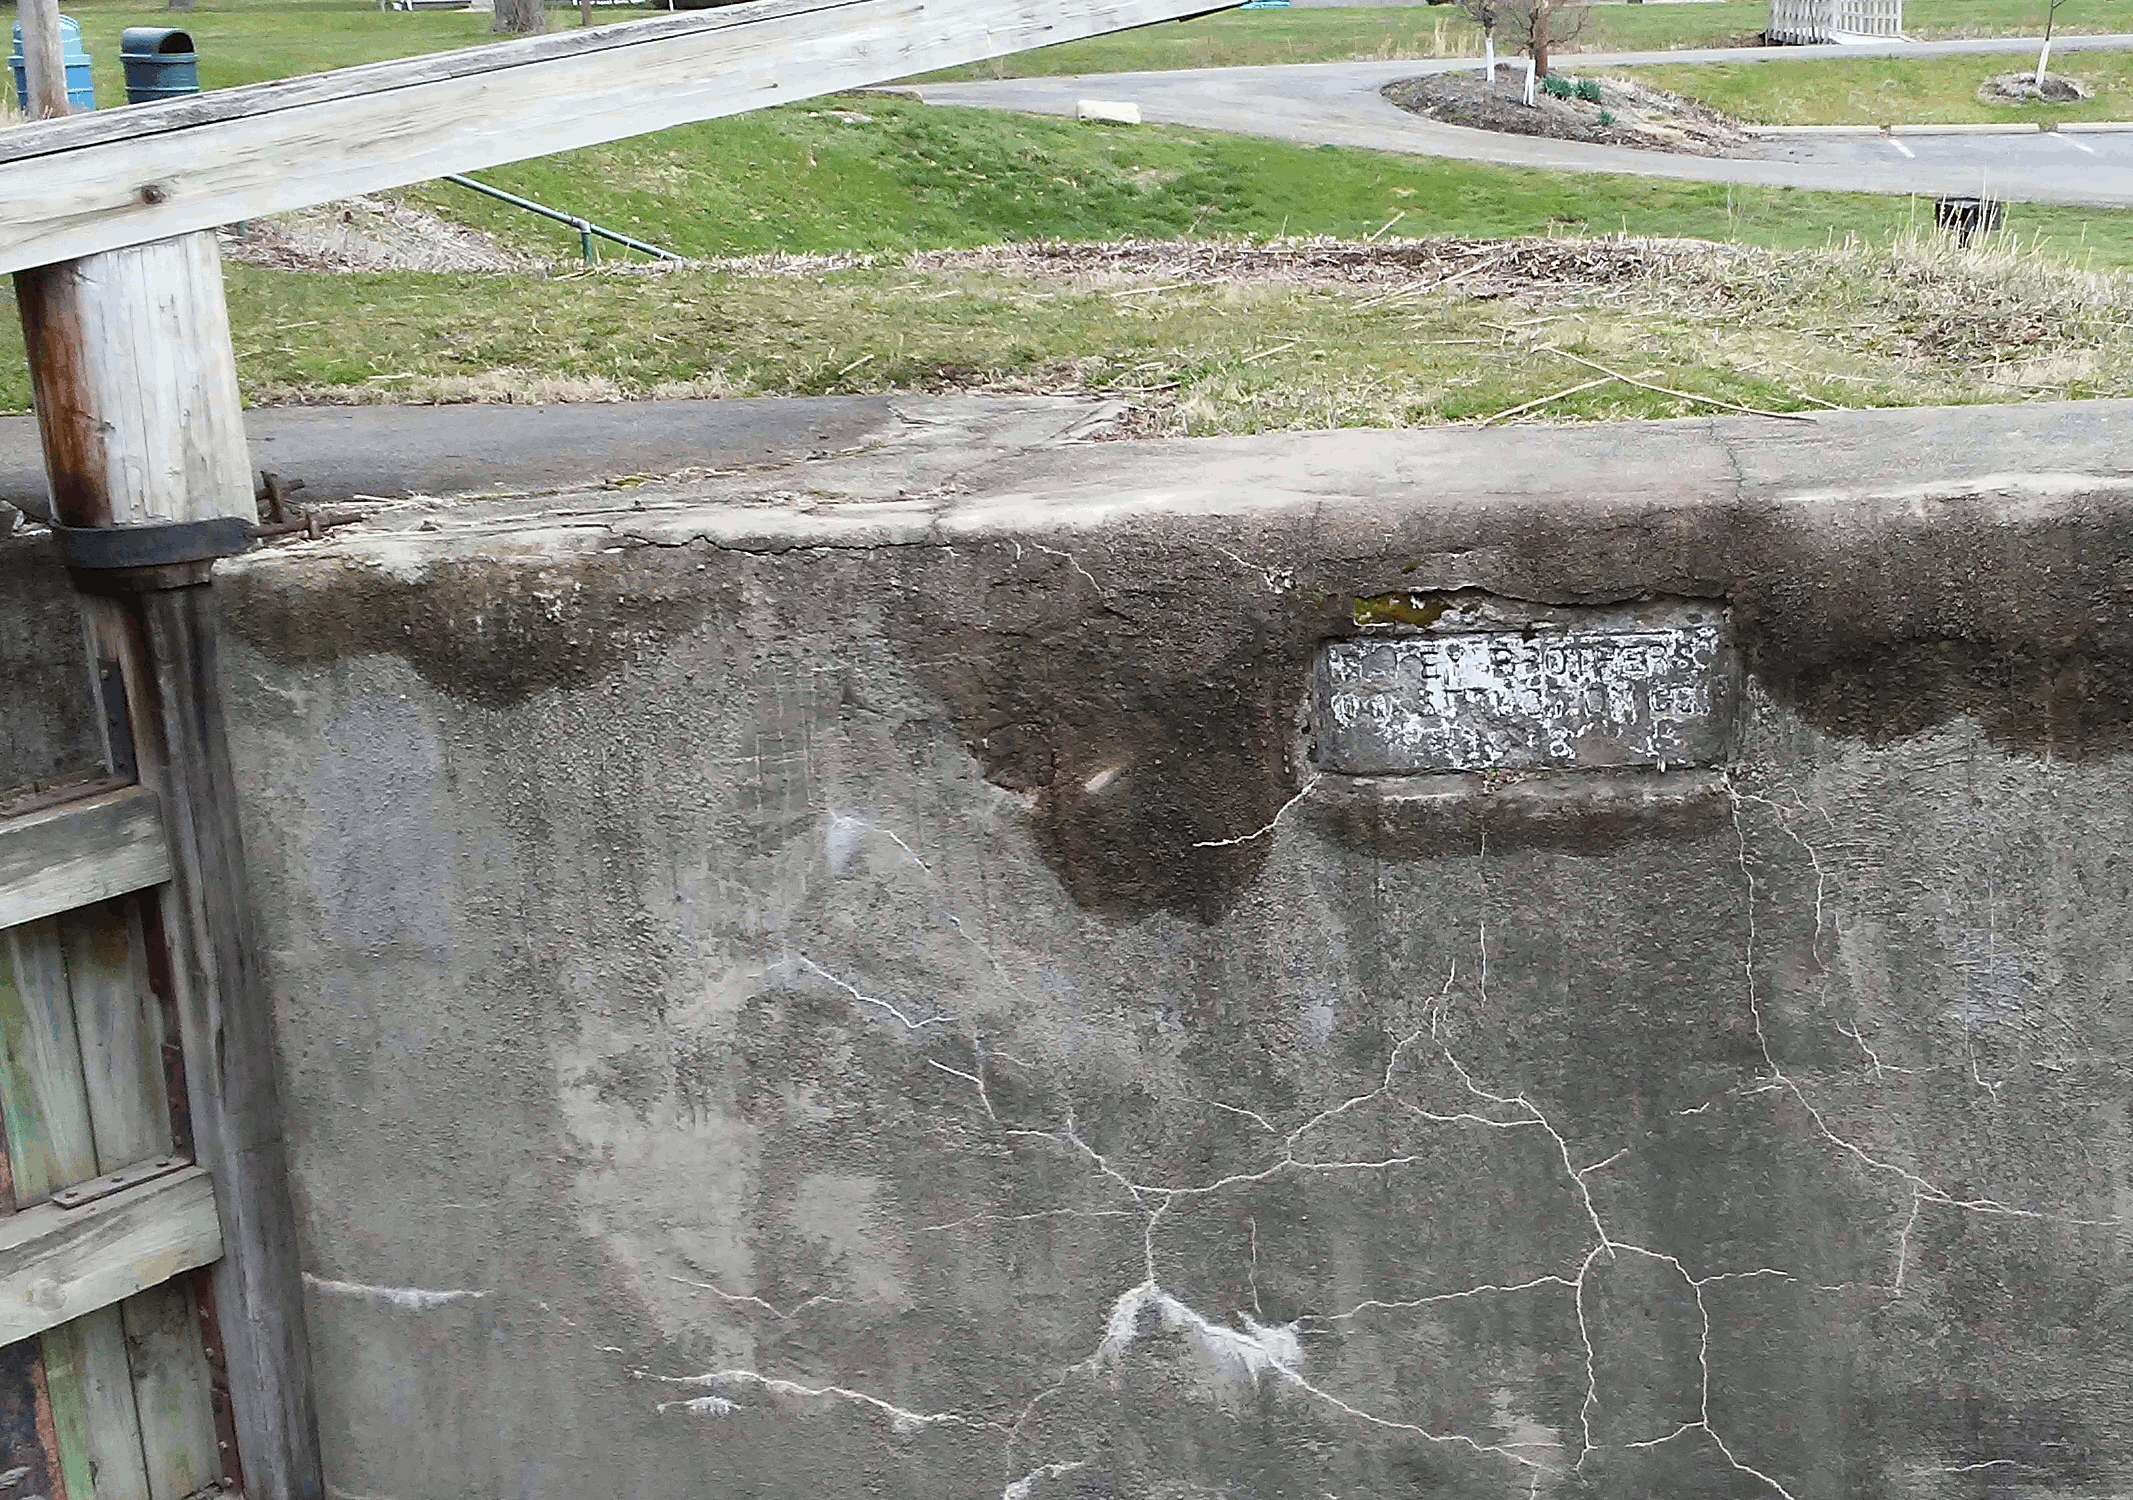 'Dailey Brothers Construction Co 1908' was stamped into the newly concreted lock wall; though, a century worth of weathering has made it increasingly more difficult to read over the years.